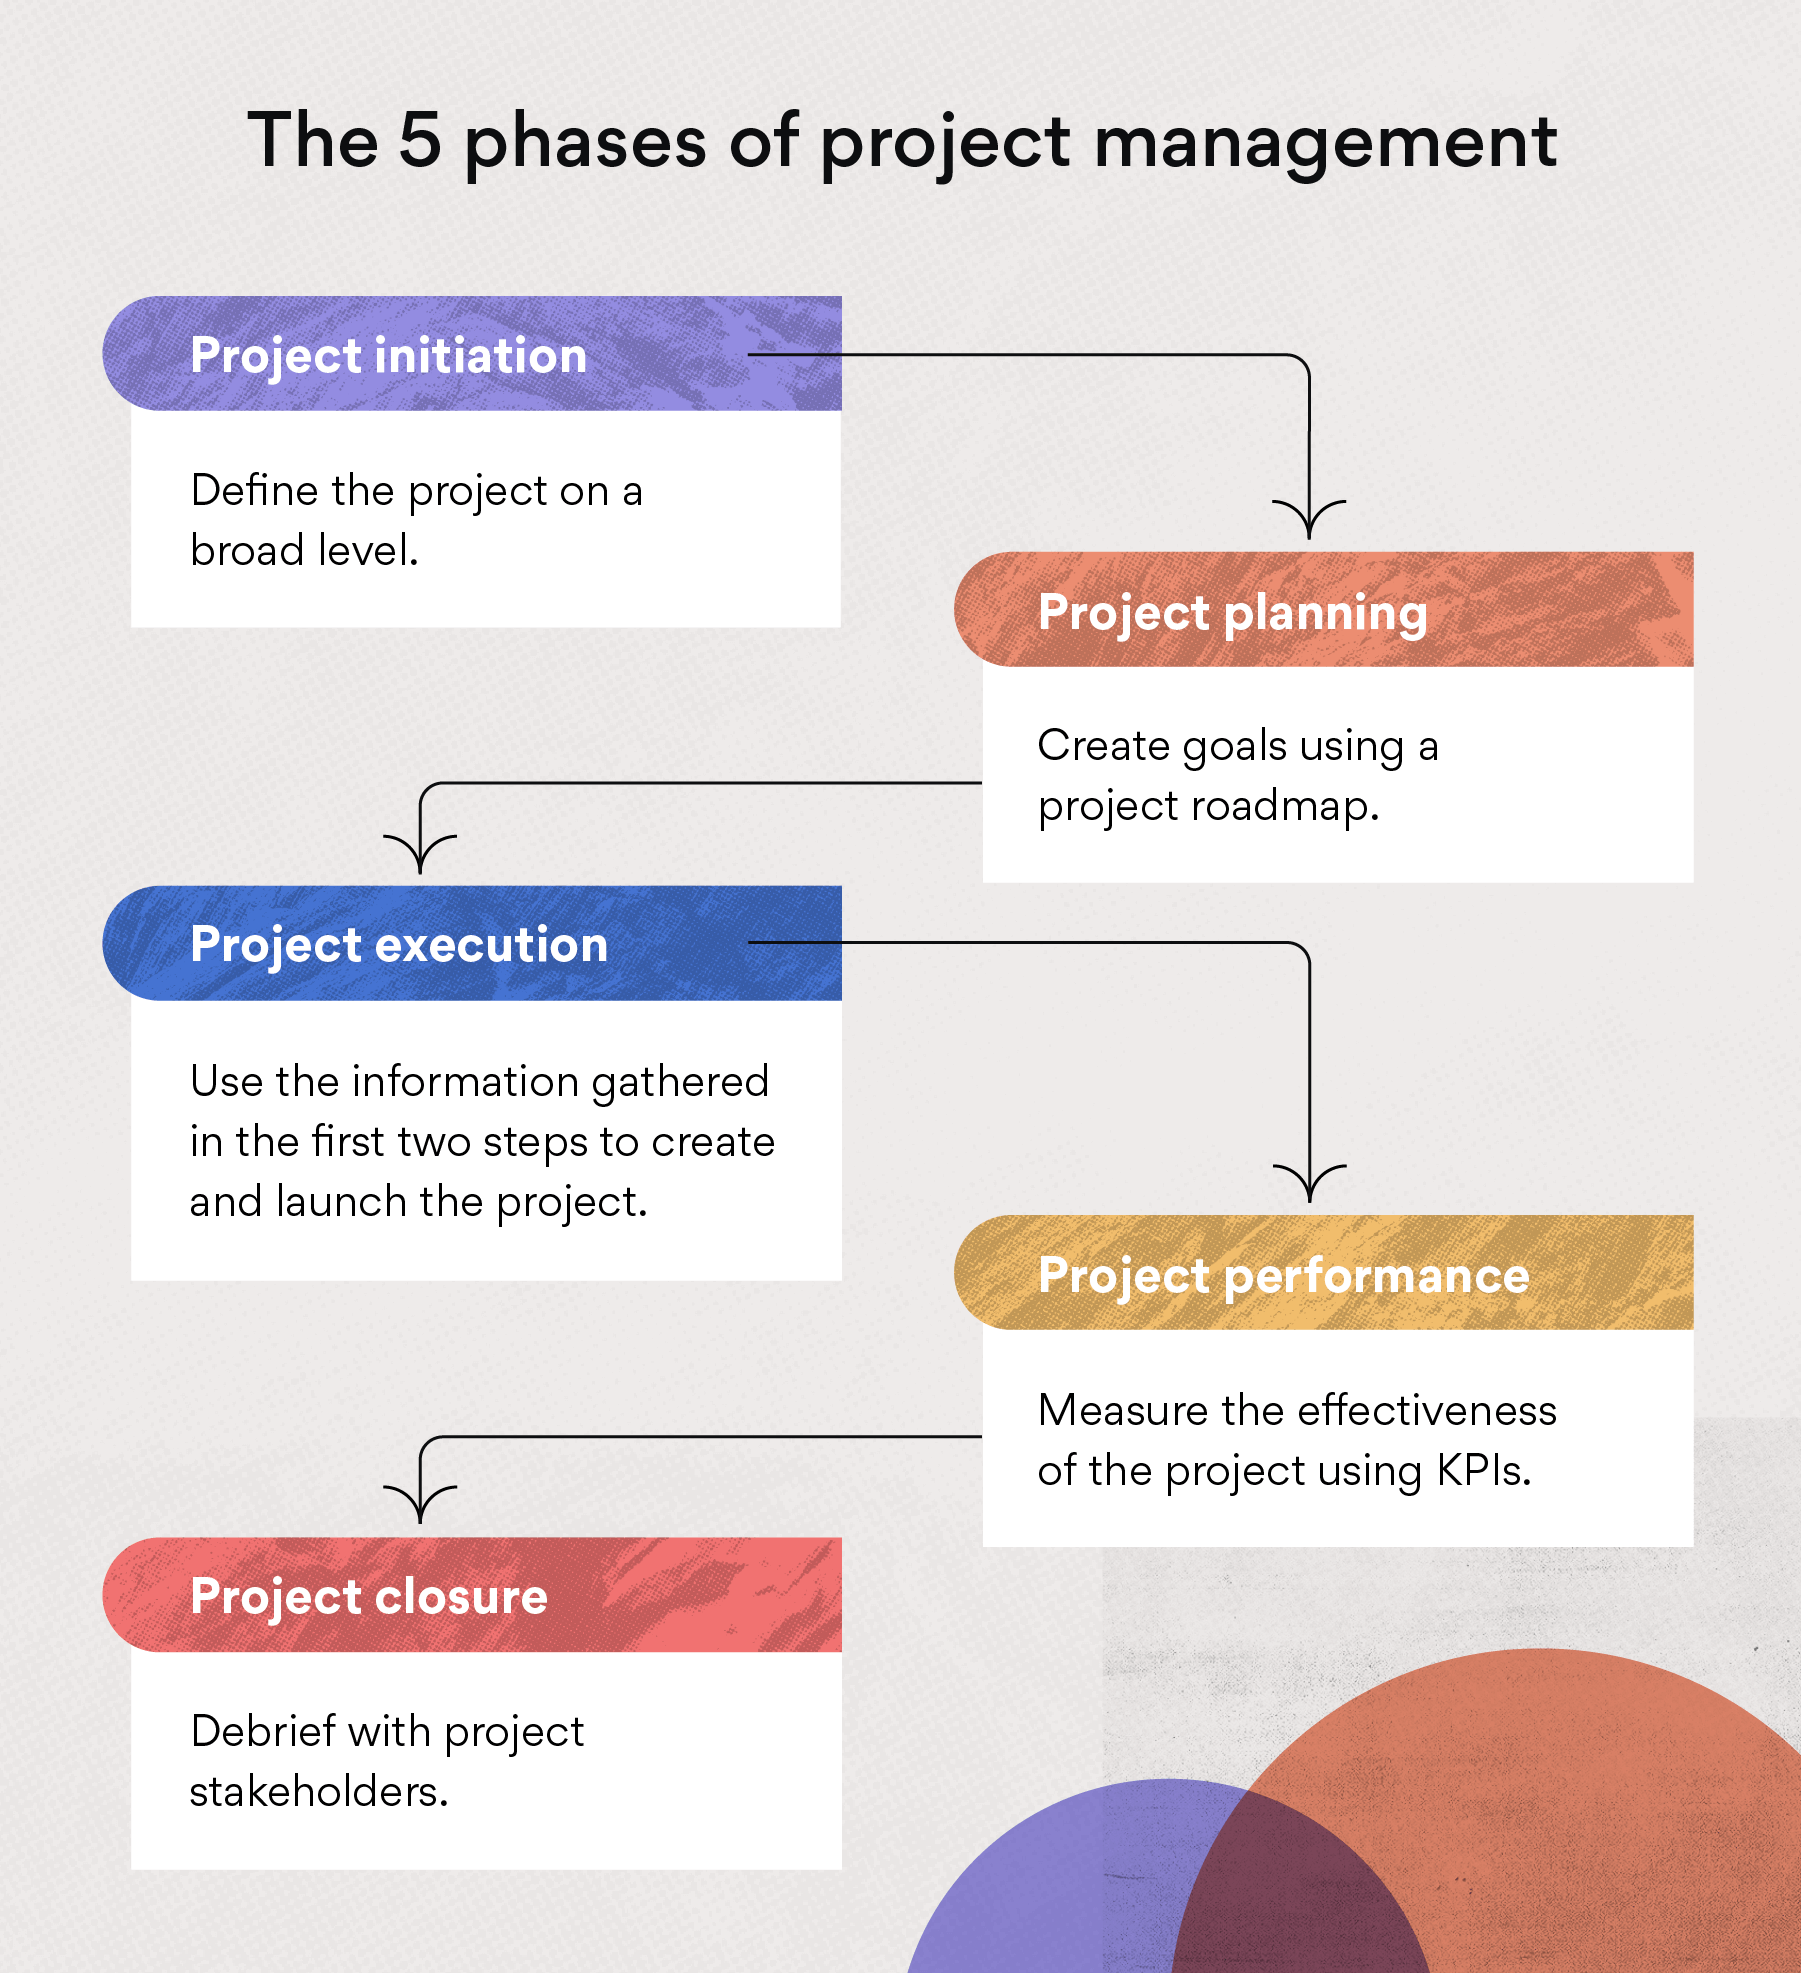 Step By Step Guide to Project Management - PDF Gate